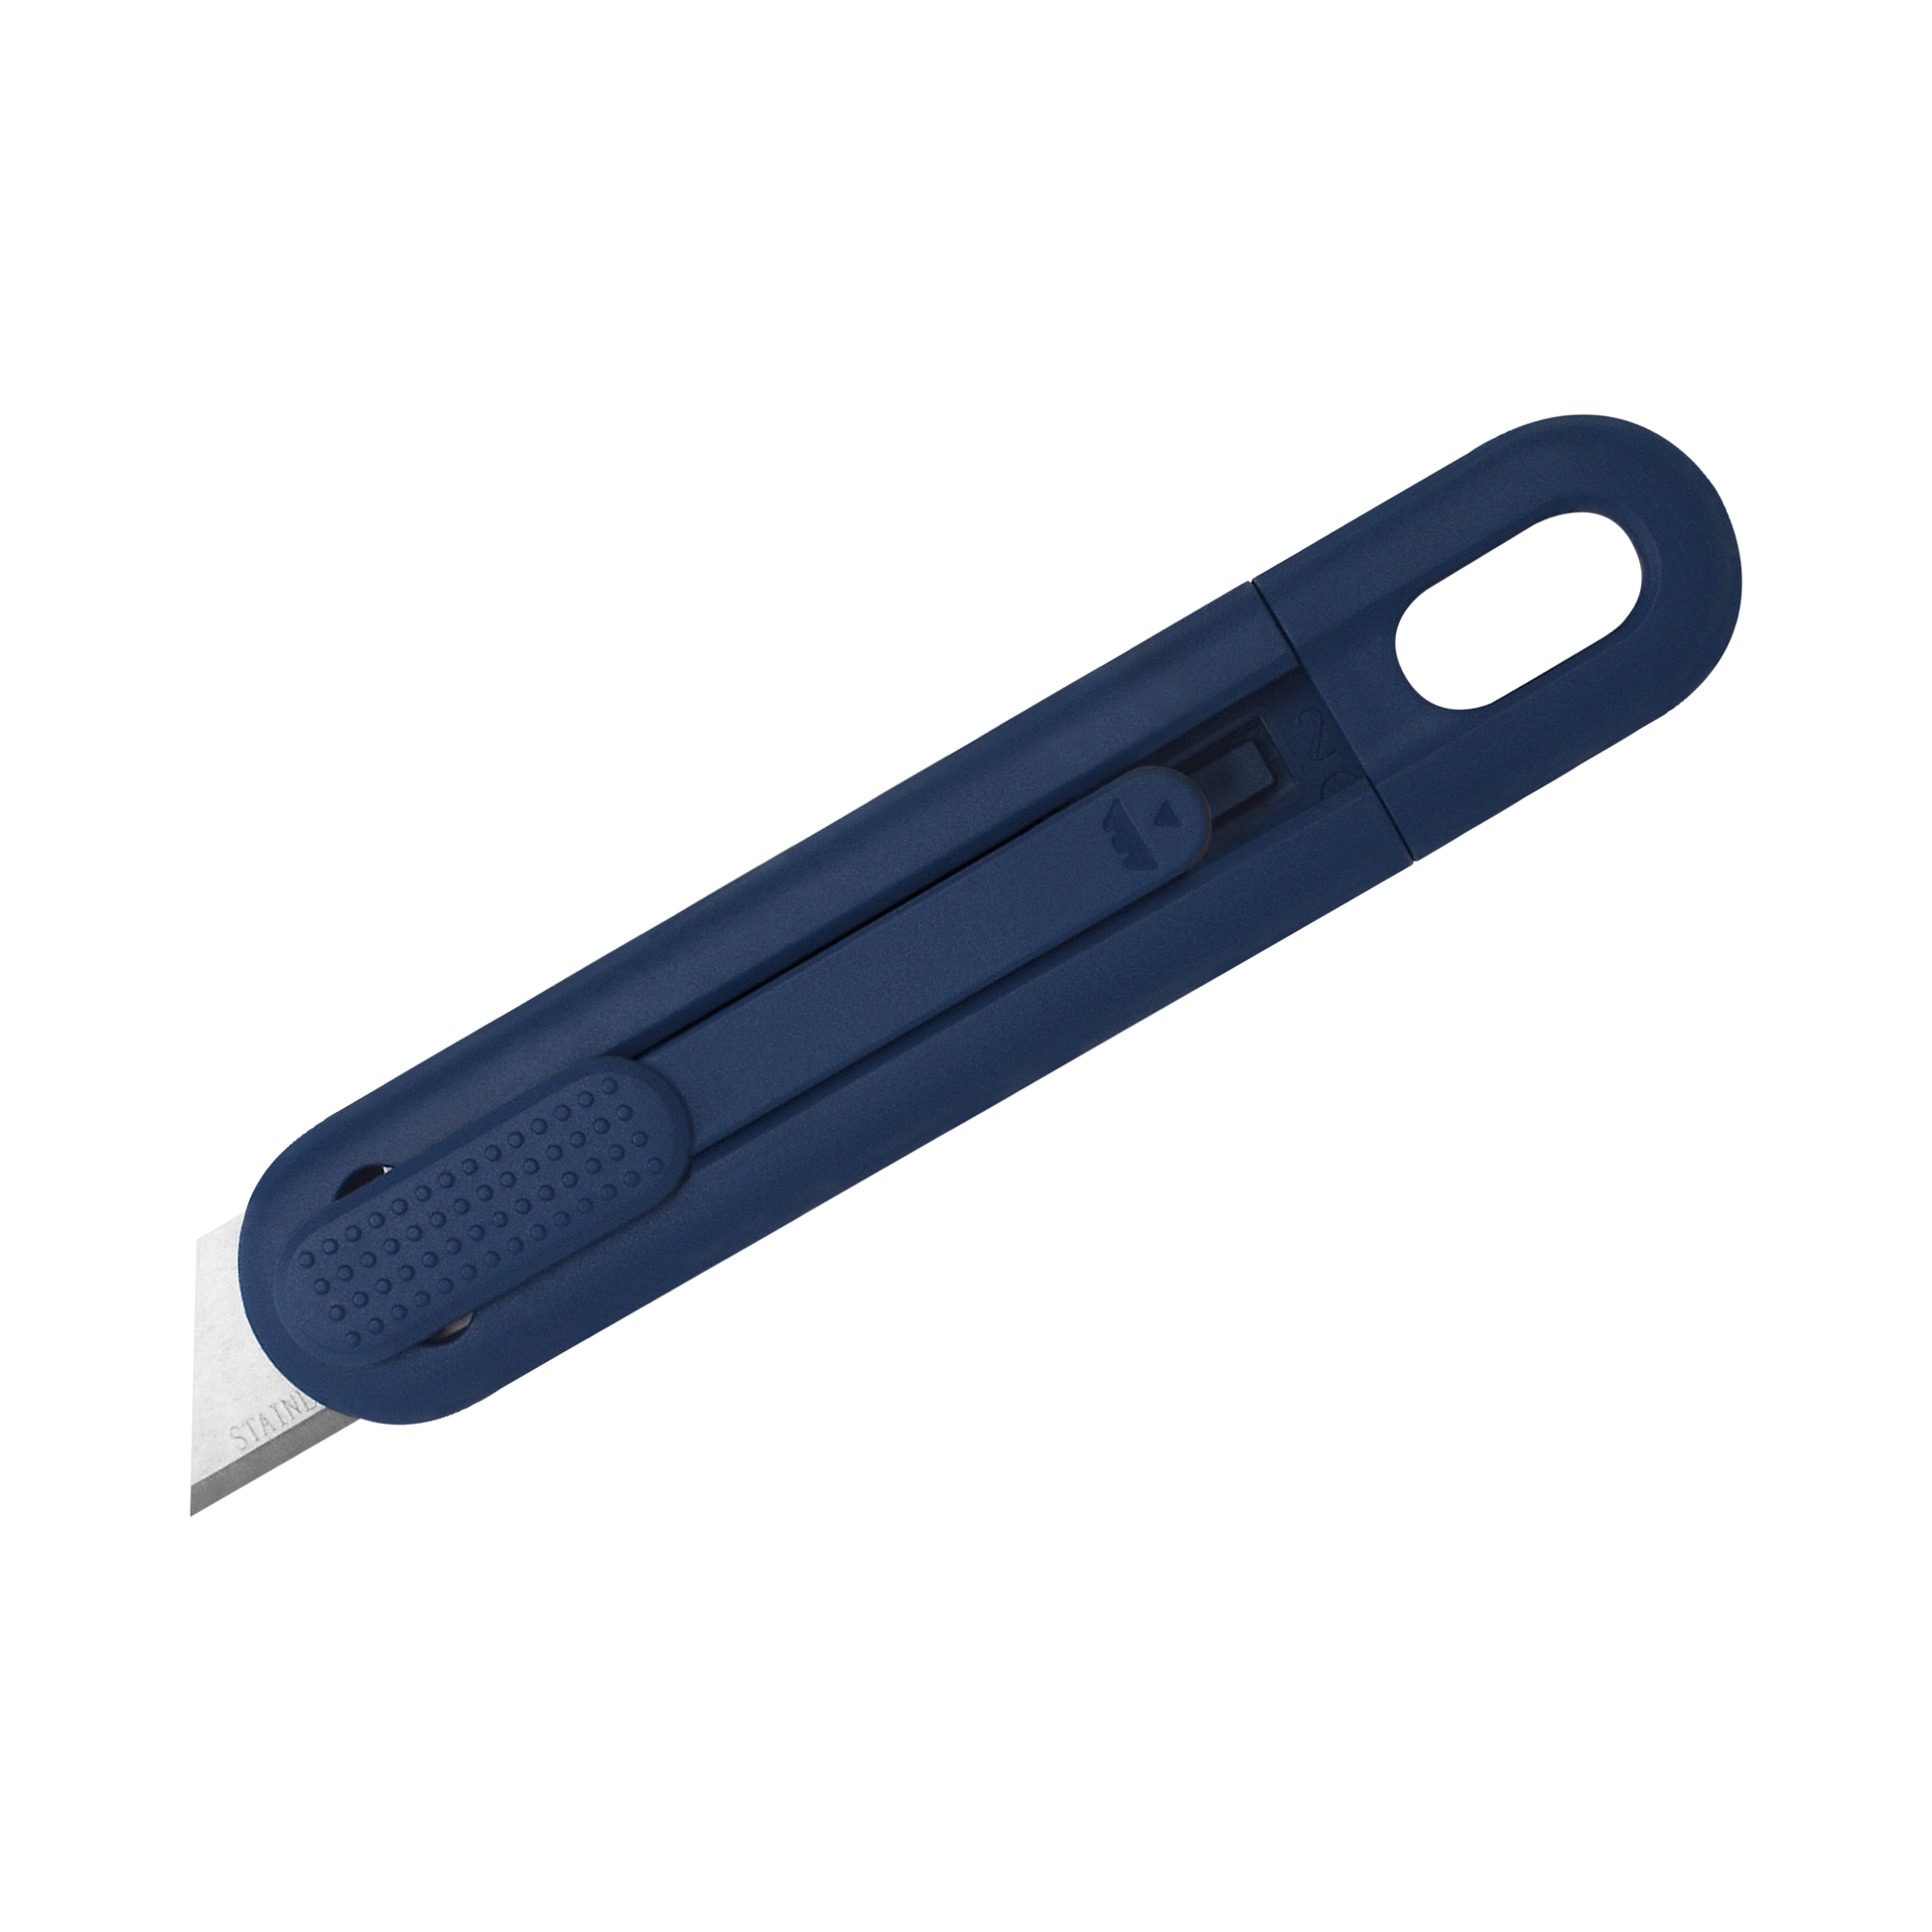 VOLO MD auto-retract safety knife - DaltonSafety